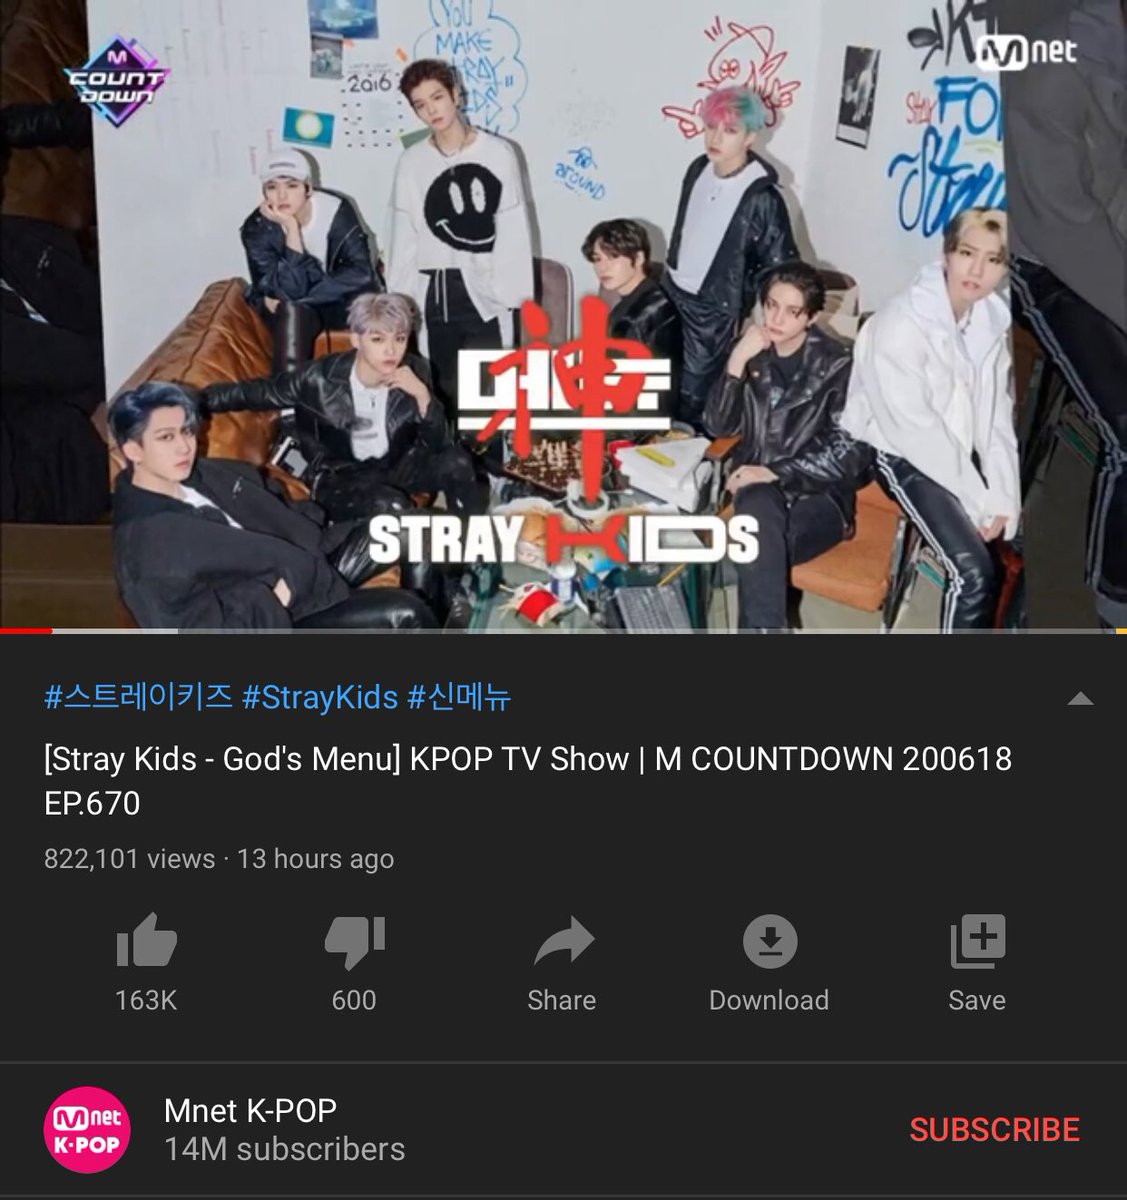 8 AM PhStCOMEBACK STAGE: 822,101 viewsMUSIC VIDEO: 12,147,102 viewsKeep streaming, Stays! We’re so close in our 1.5M goal for the CB stage & 20M in the MV! Fighting, Stays! #StrayKids  